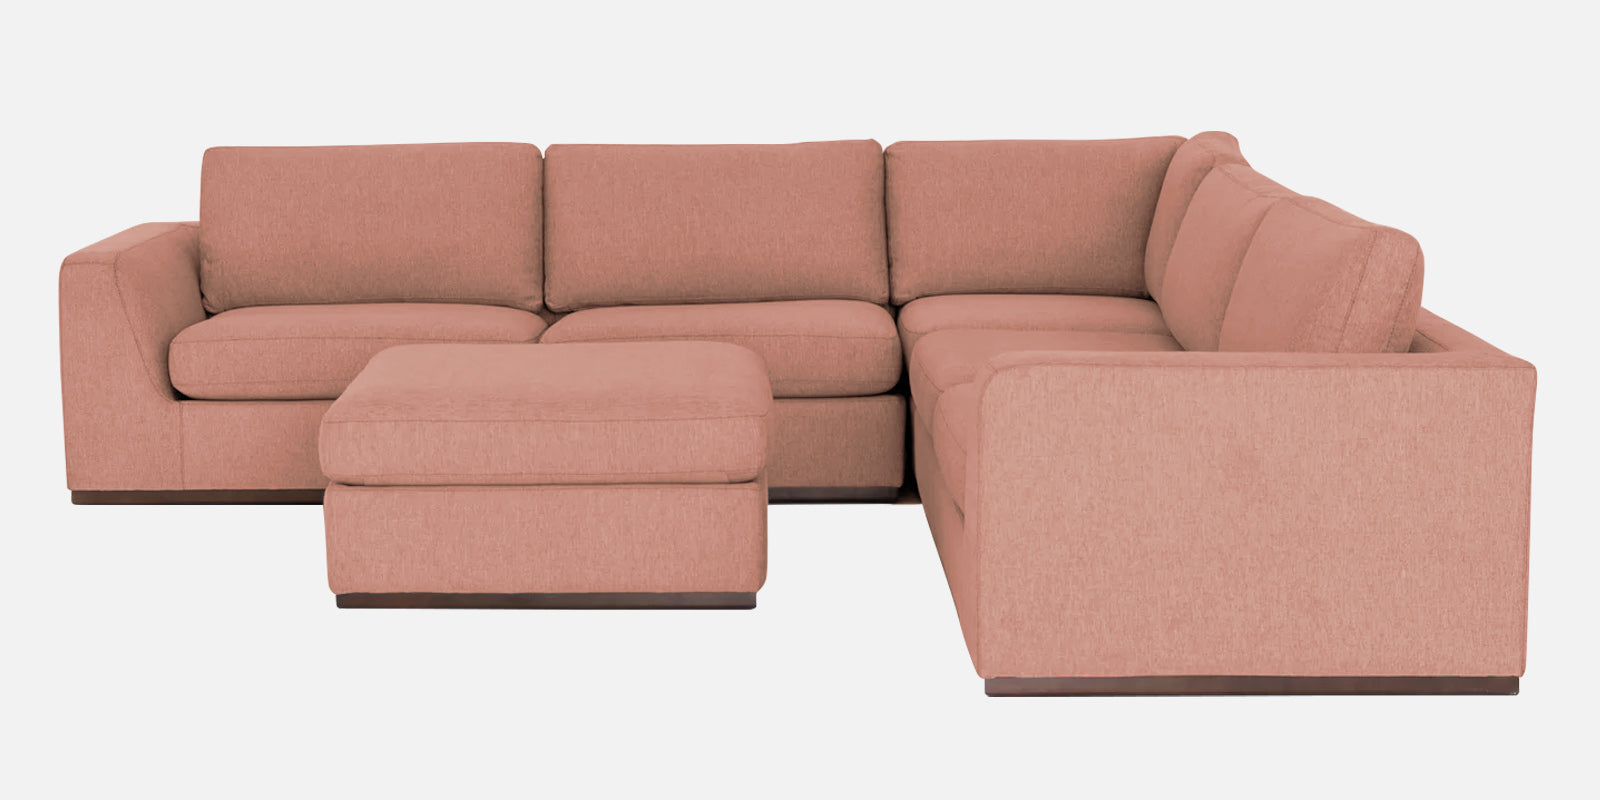 Freedom Velvet 6 Seater RHS Sectional Sofa In Blush Pink Colour